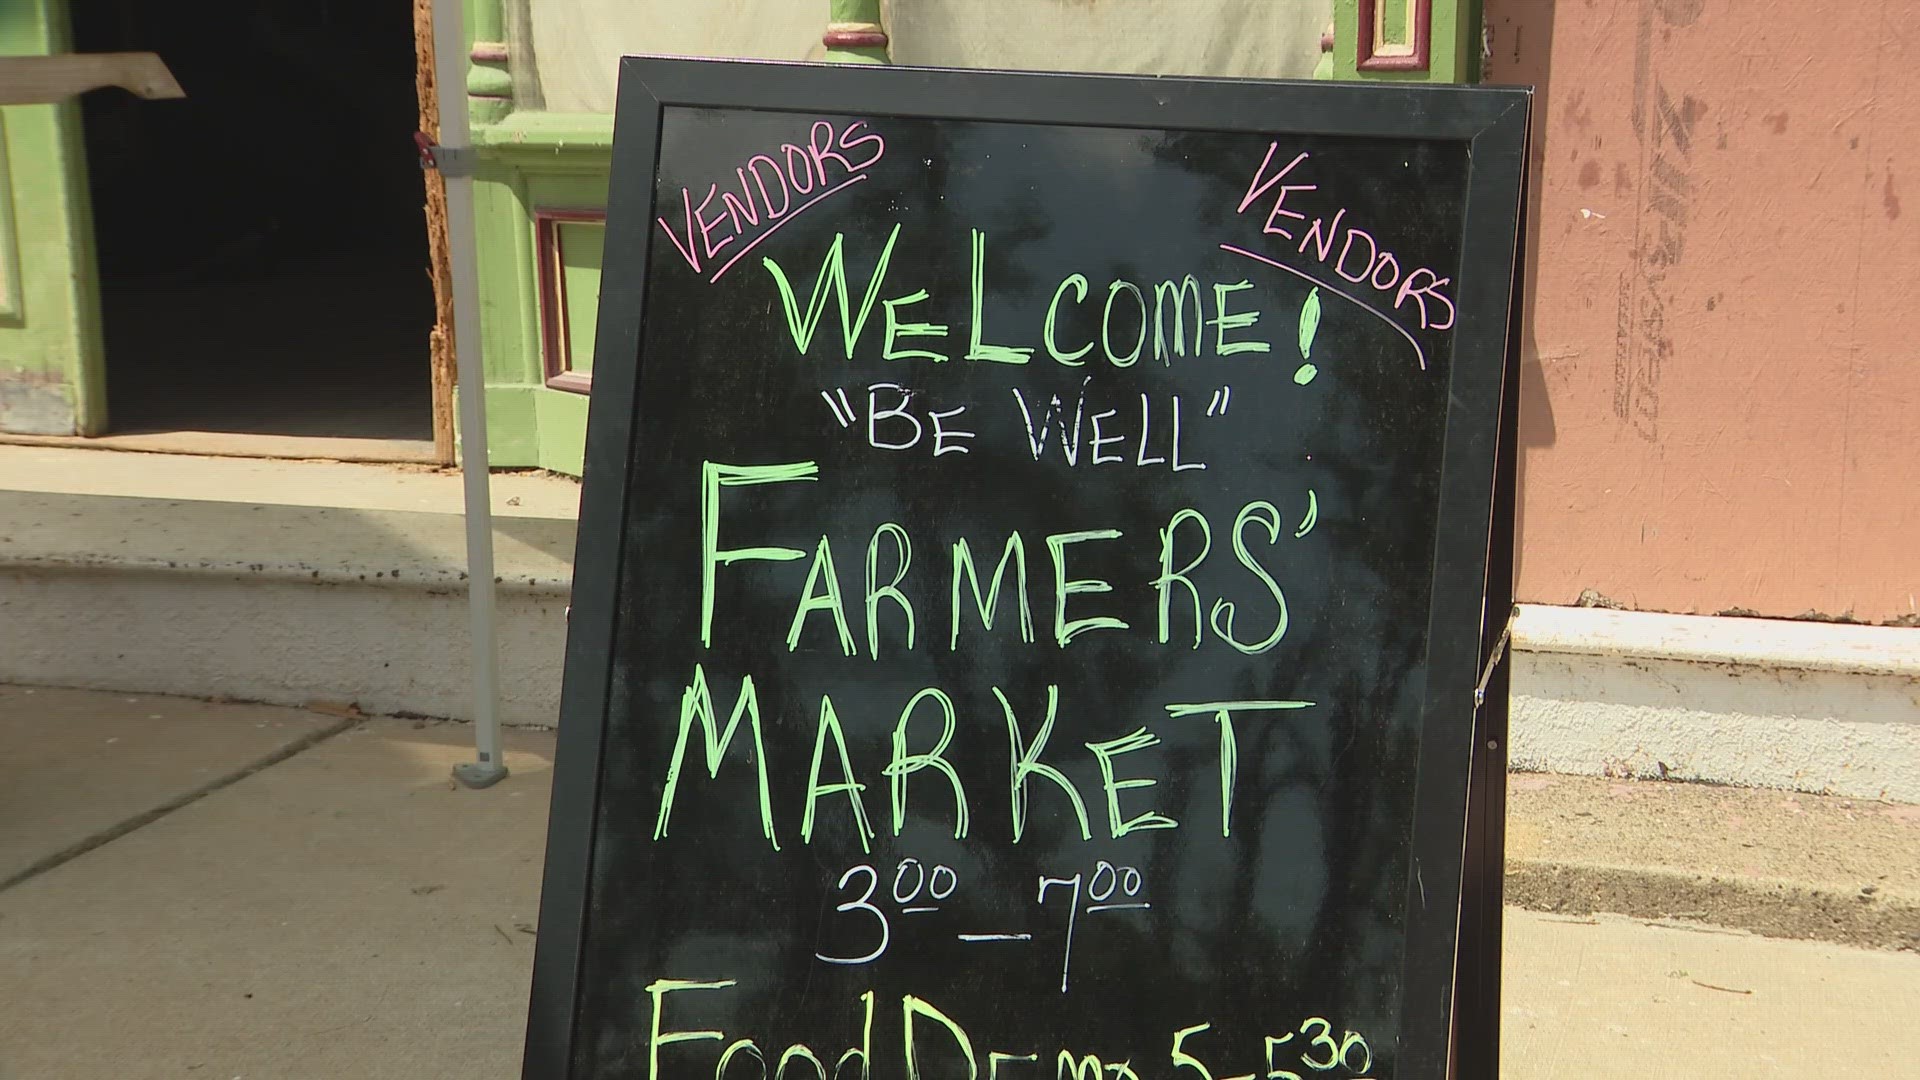 When grocery stores aren't nearby, it's harder to eat and cook with fresh, nutritious ingredients. The local effort brings fresh produce to north St. Louis City.